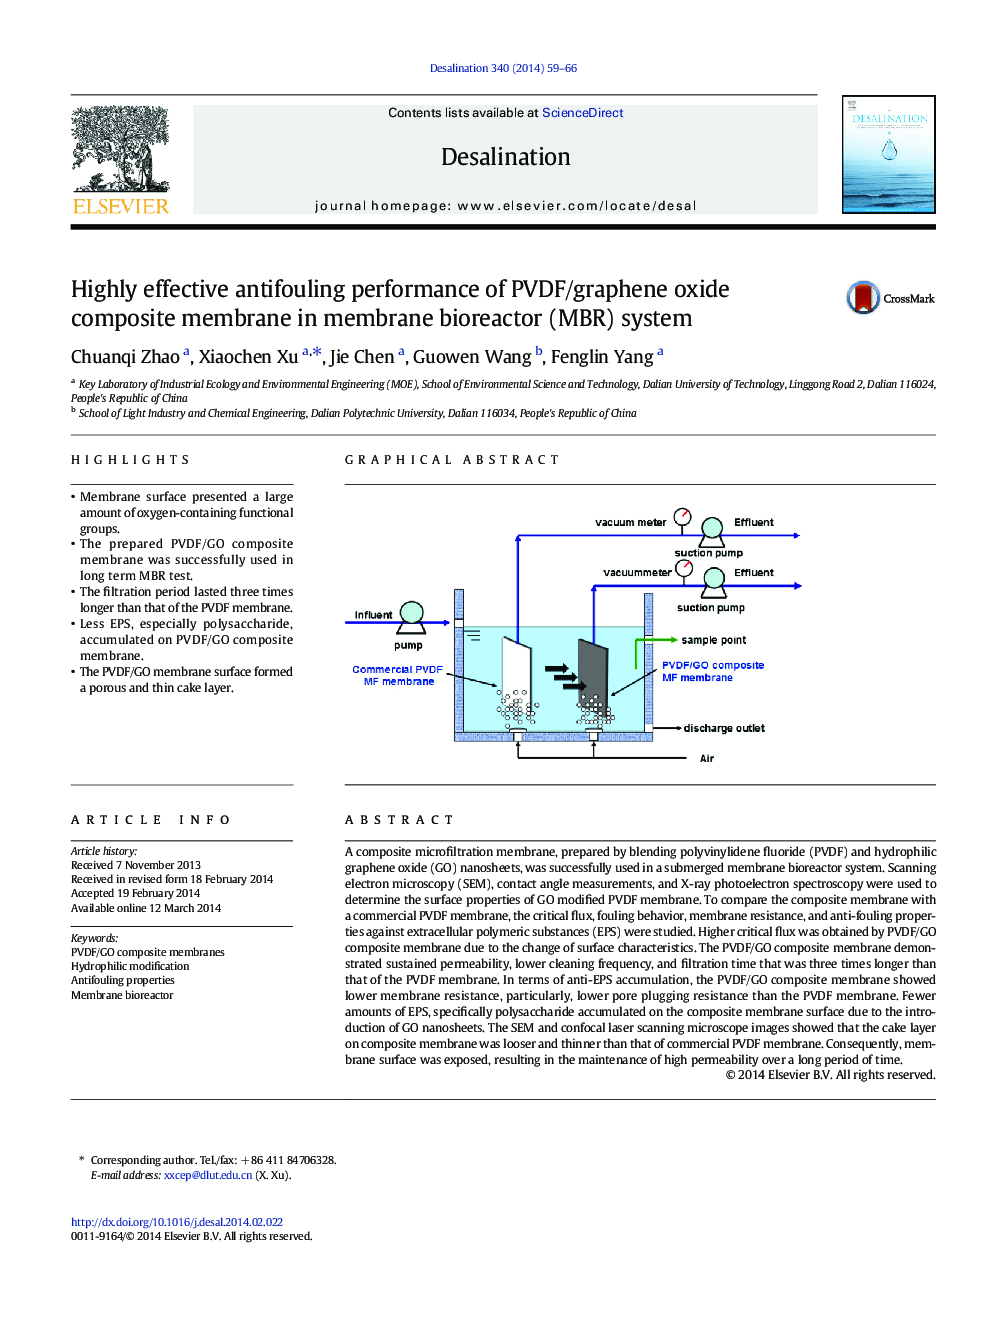 Highly effective antifouling performance of PVDF/graphene oxide composite membrane in membrane bioreactor (MBR) system